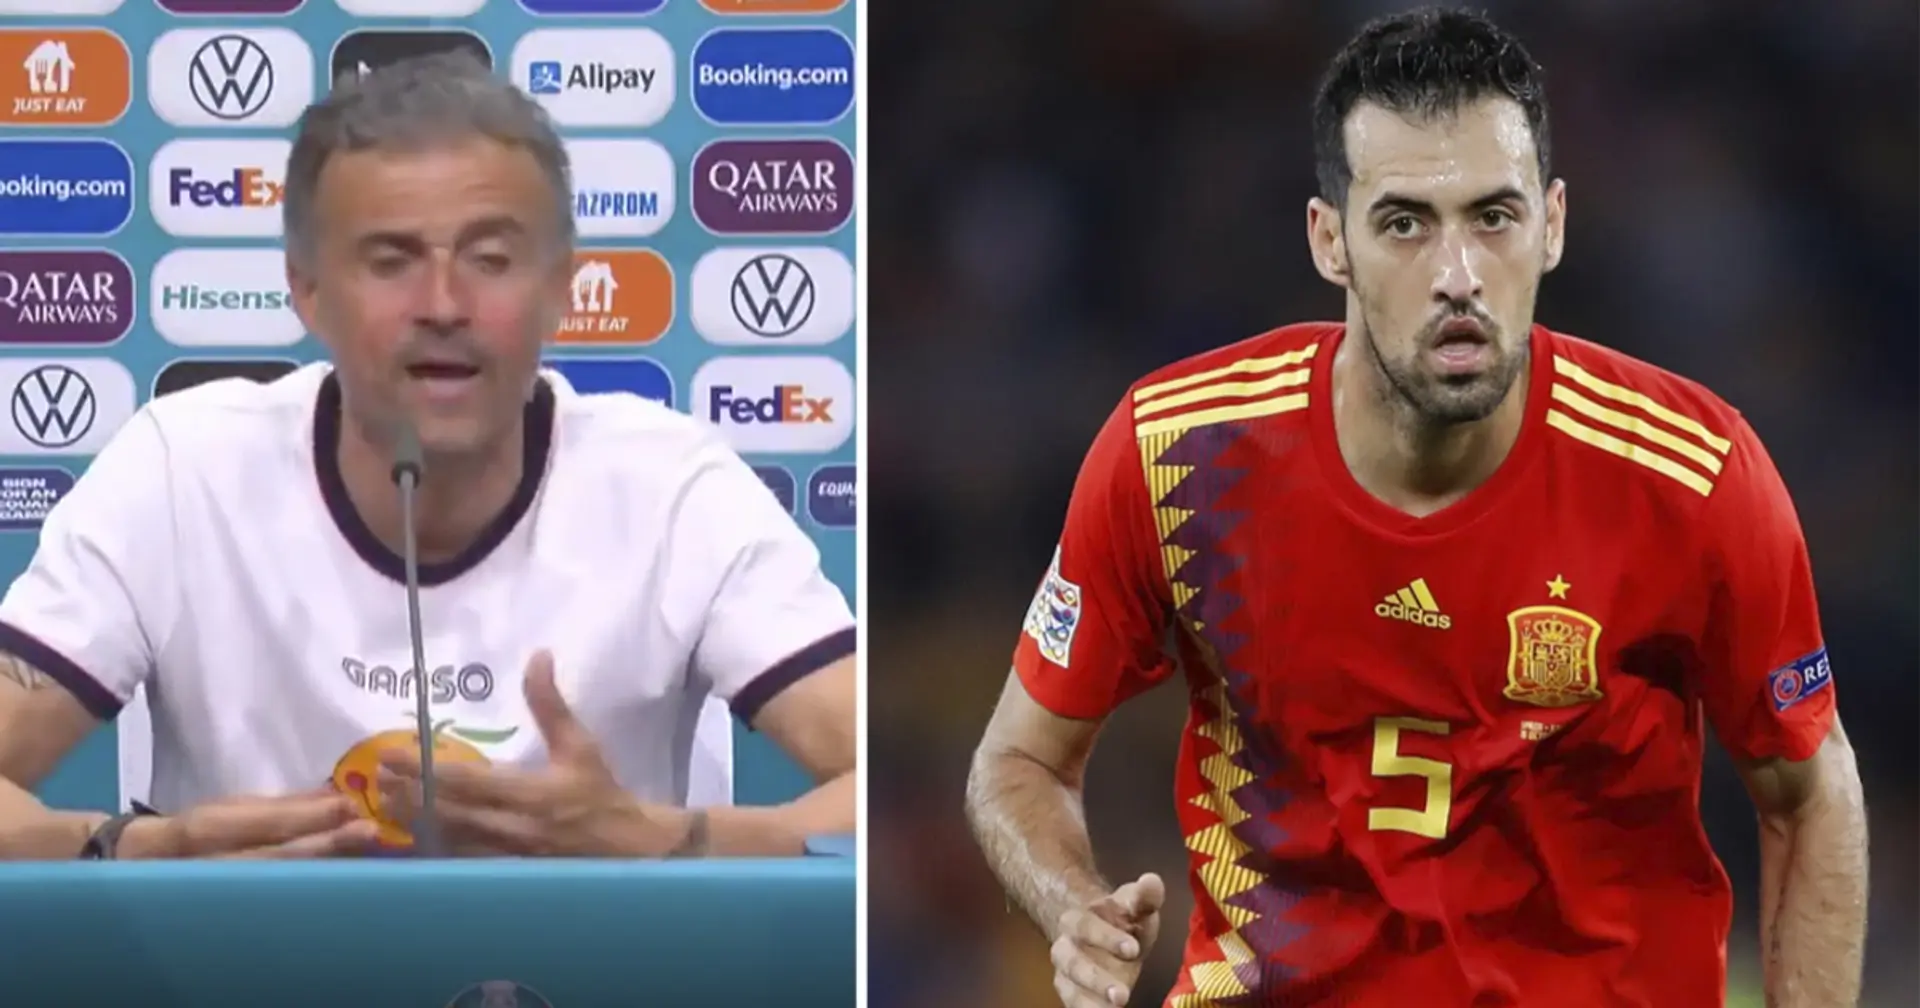 Luis Enrique explains why many people 'can't understand Busquets'